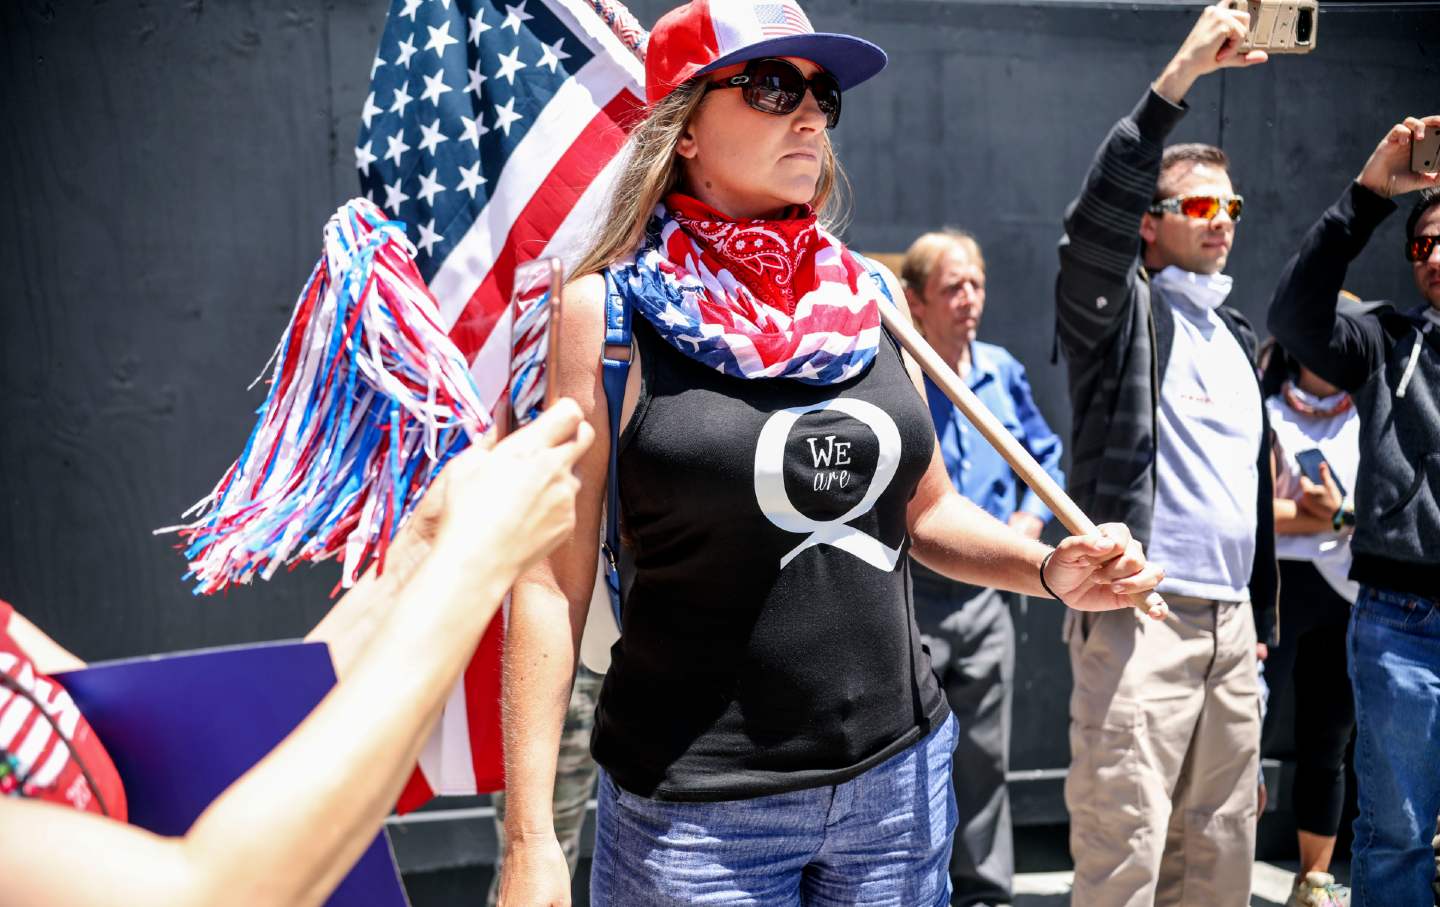 A woman in a shirt showing support for the QAnon conspiracy theory holds an American flag.